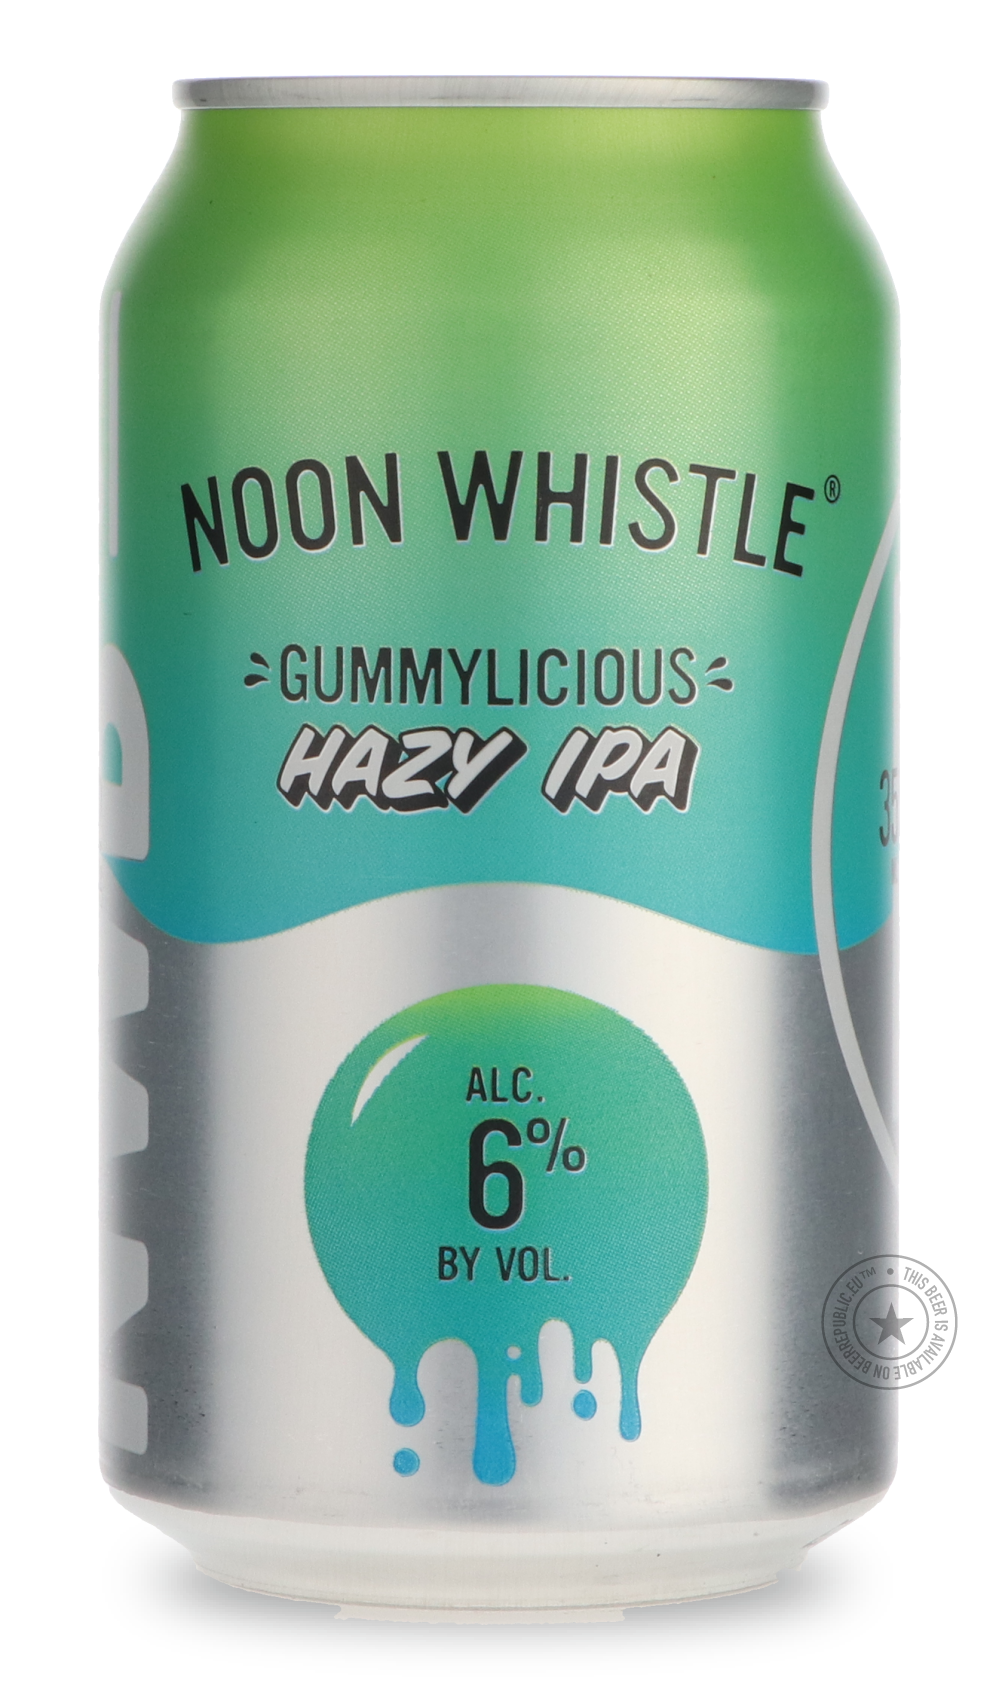 -Noon Whistle- Gummylicious-IPA- Only @ Beer Republic - The best online beer store for American & Canadian craft beer - Buy beer online from the USA and Canada - Bier online kopen - Amerikaans bier kopen - Craft beer store - Craft beer kopen - Amerikanisch bier kaufen - Bier online kaufen - Acheter biere online - IPA - Stout - Porter - New England IPA - Hazy IPA - Imperial Stout - Barrel Aged - Barrel Aged Imperial Stout - Brown - Dark beer - Blond - Blonde - Pilsner - Lager - Wheat - Weizen - Amber - Barle